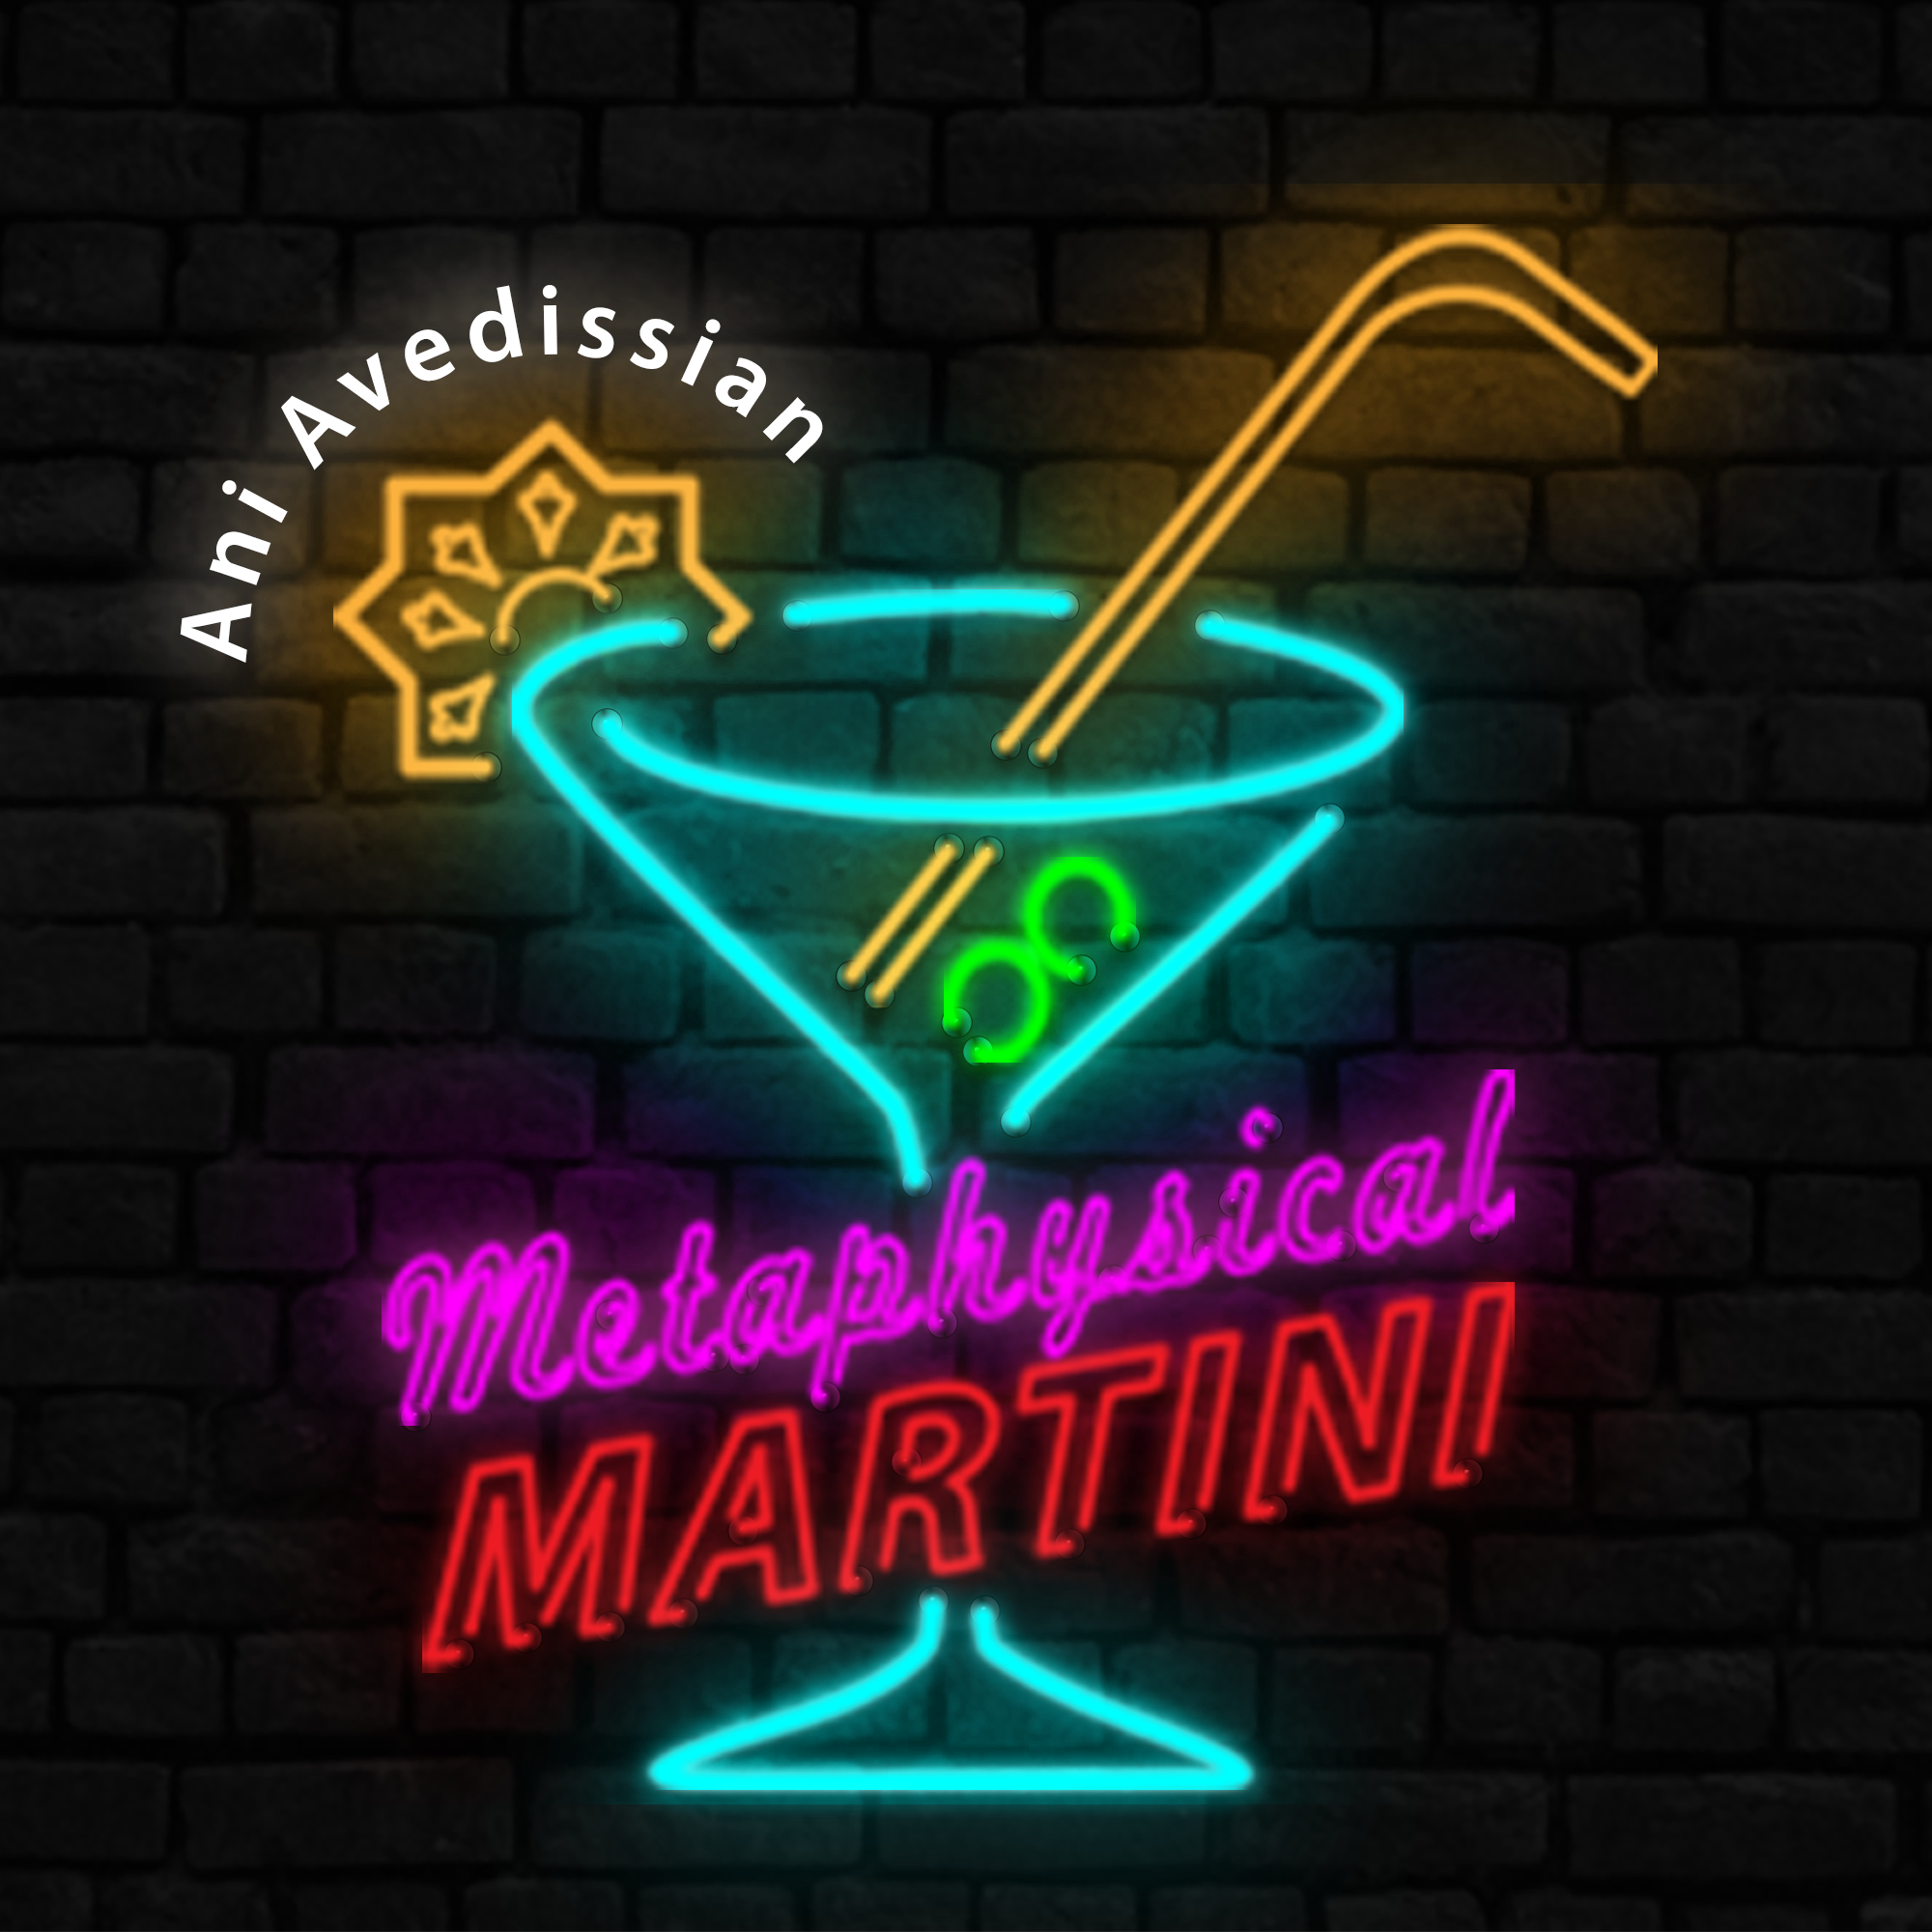 "Metaphysical Martini"   10/30/19  "You're not very shaman-like, are you?"  . . . and all the other usual stuff!